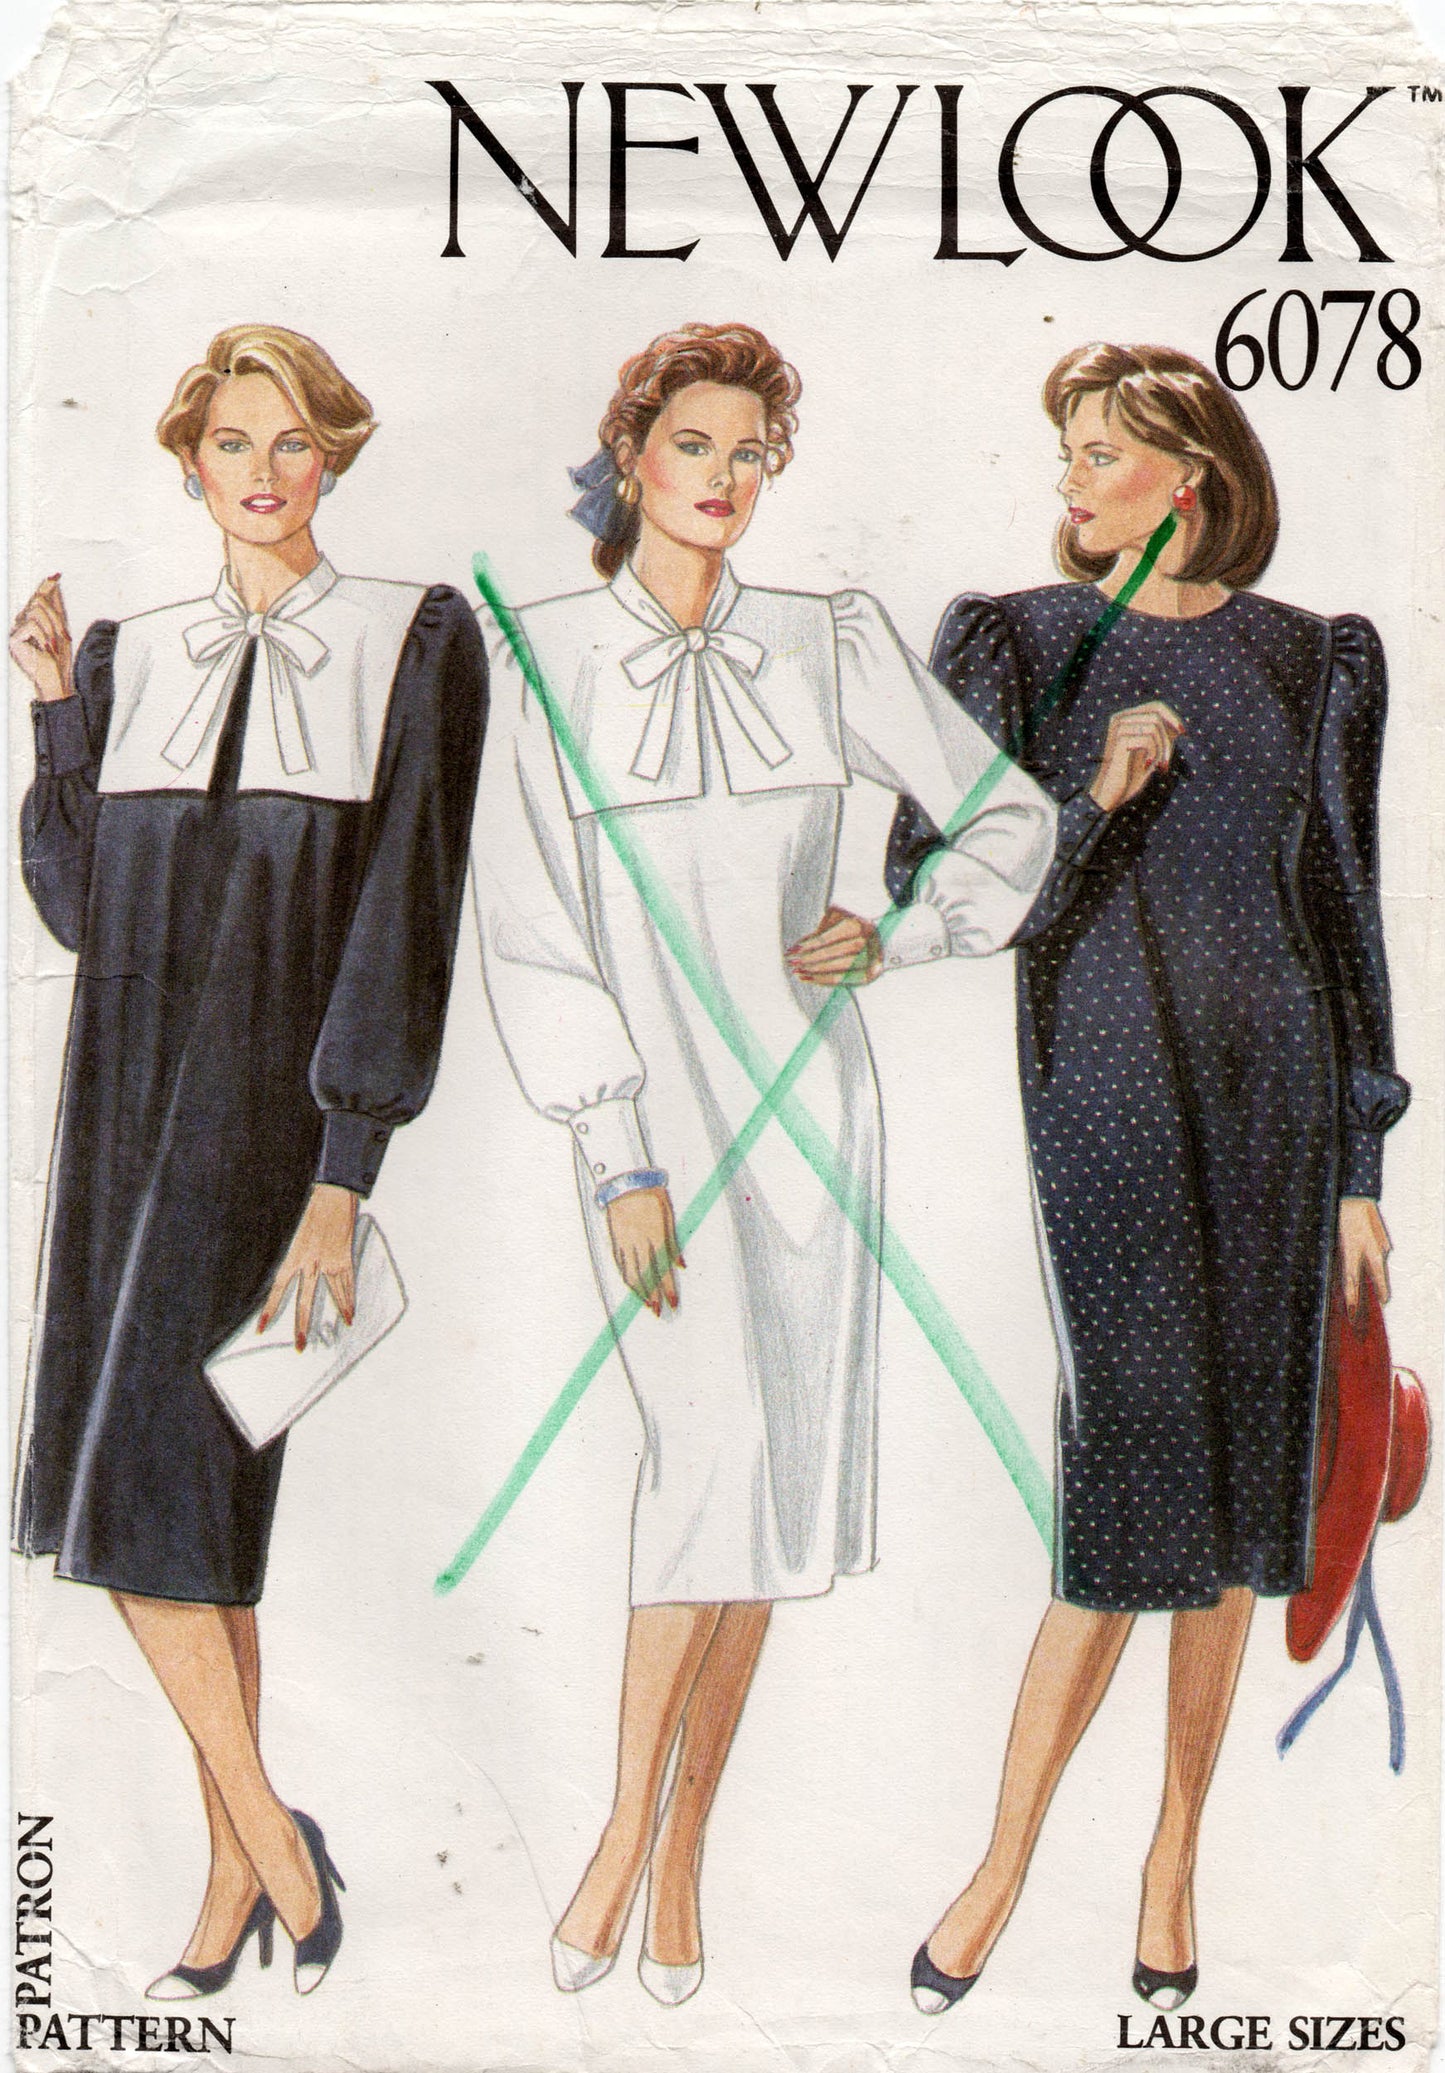 New Look 6078 PLUS SIZE Womens Dress with Detachable Collar 1980s Vintage Sewing Pattern Size 18 - 28 UNCUT Factory Folded